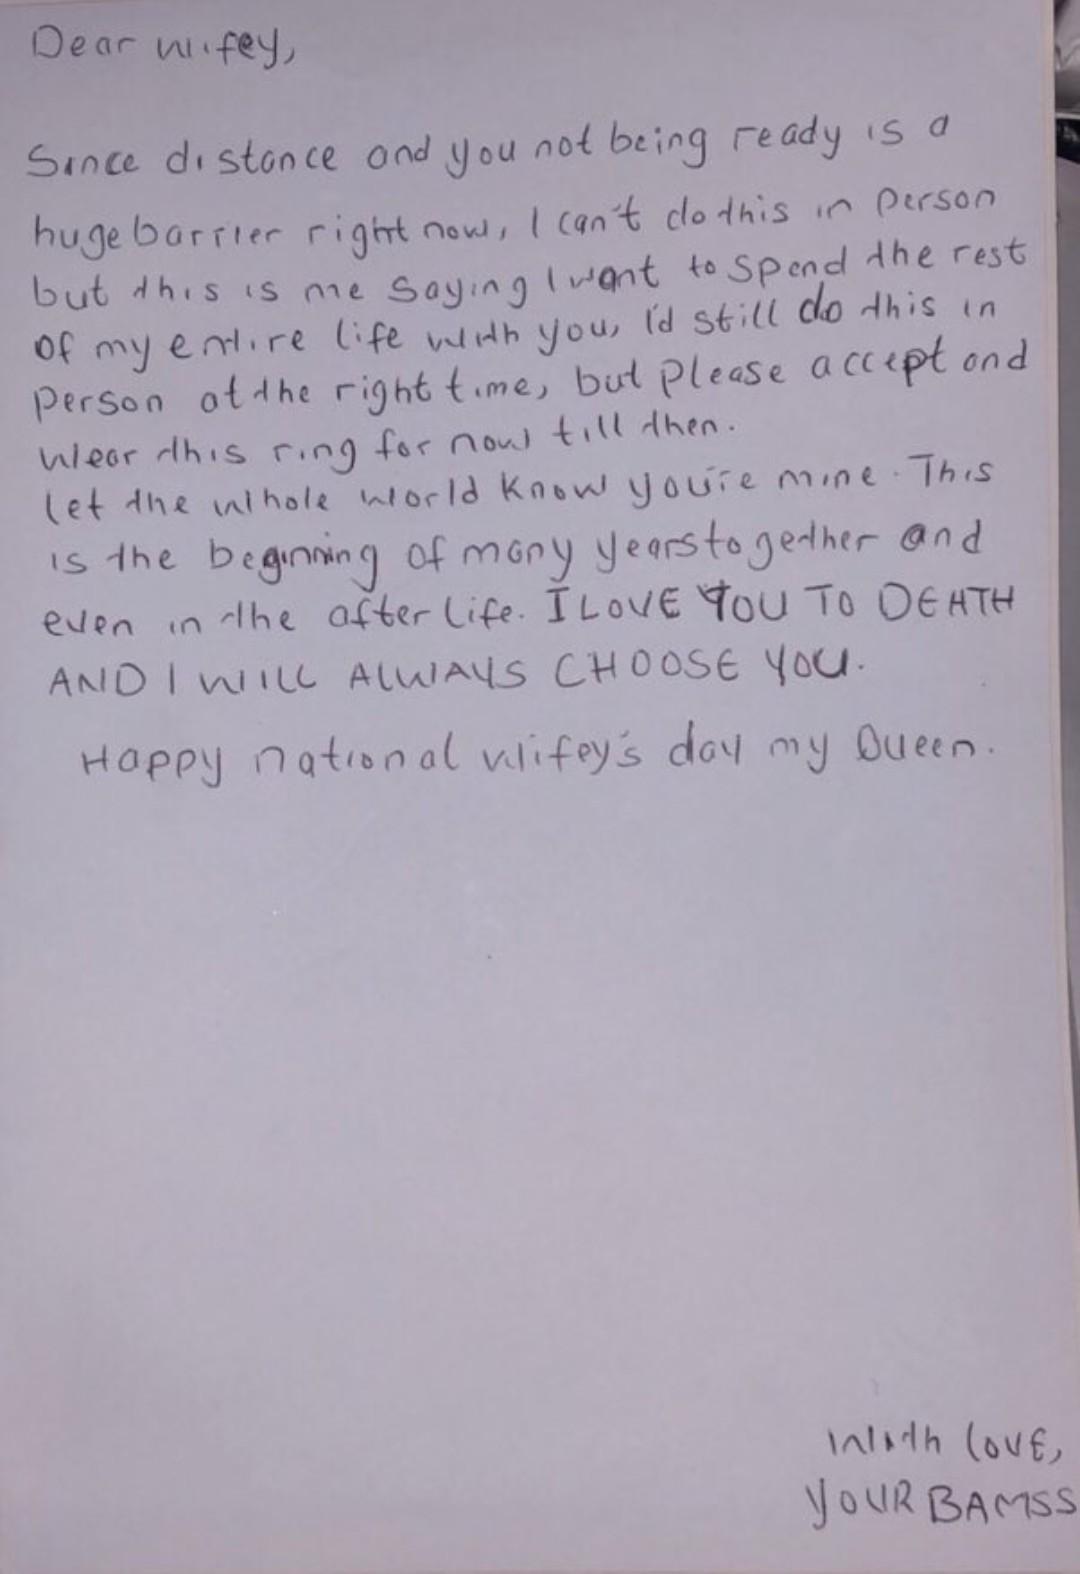 Man sends proposal letter and engagement ring to girlfriend through courier service (Photos ...